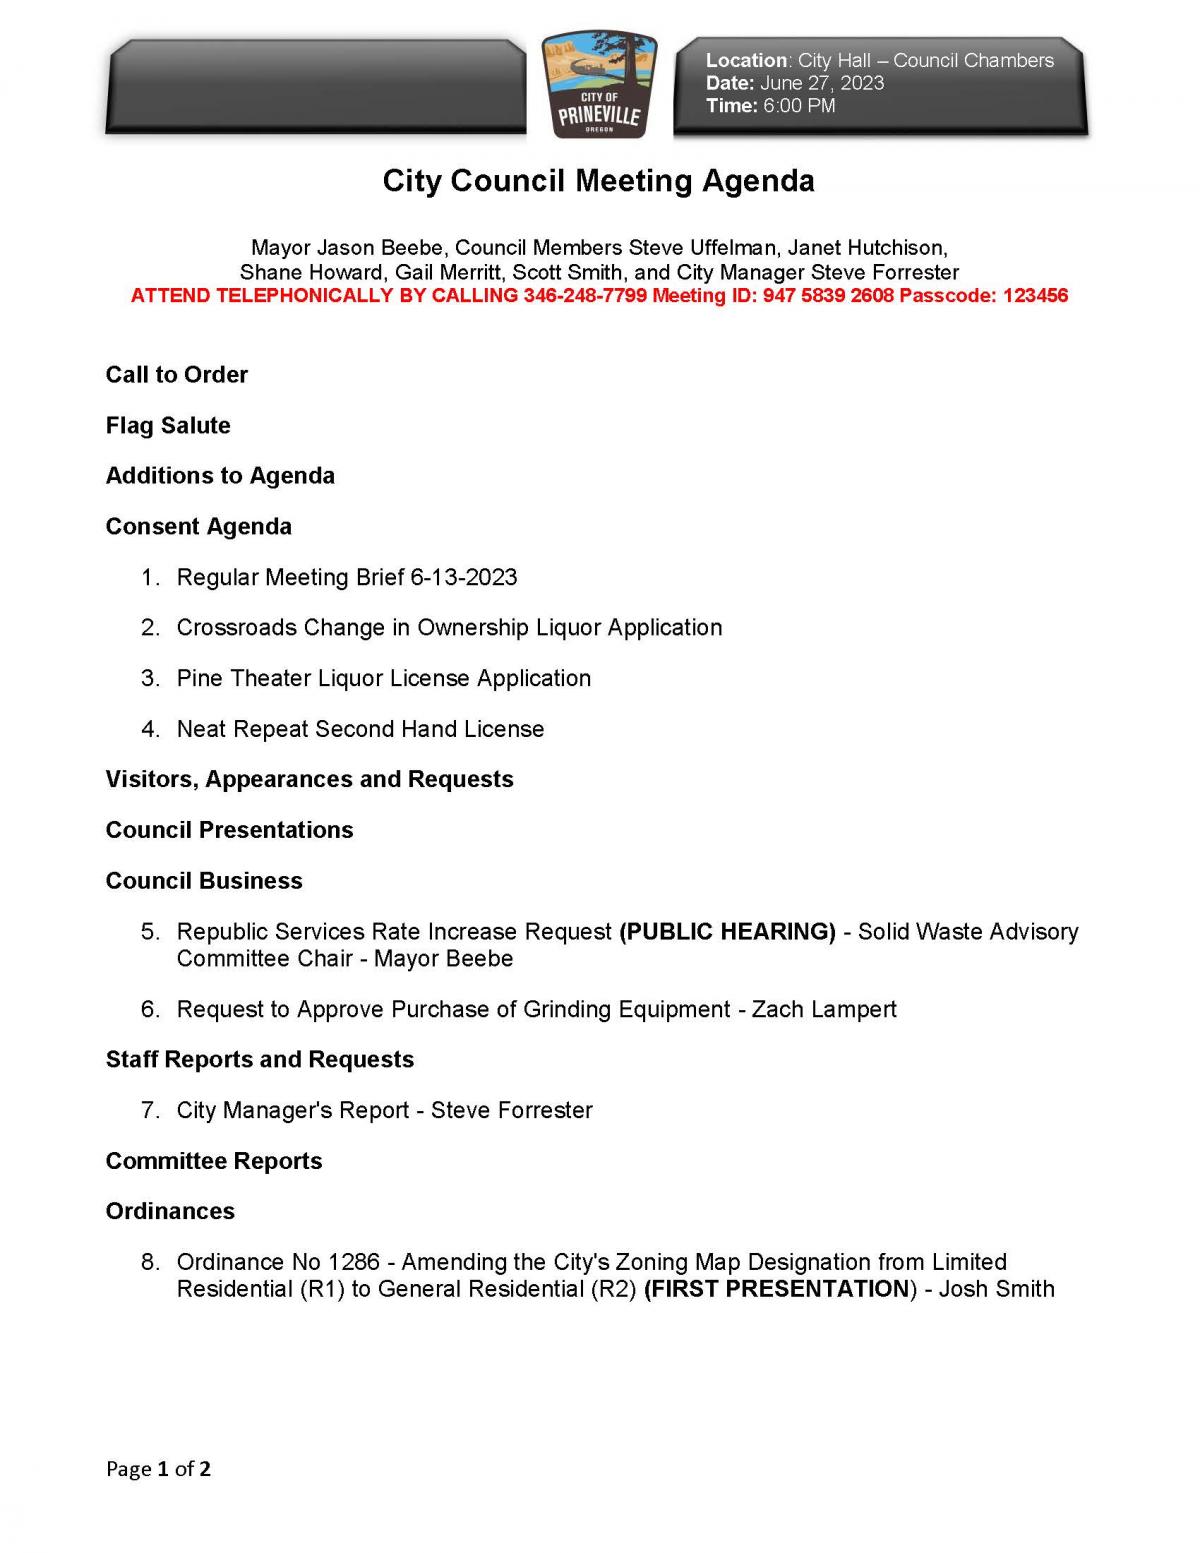 Page 1 of Council Agenda 6-27-2023